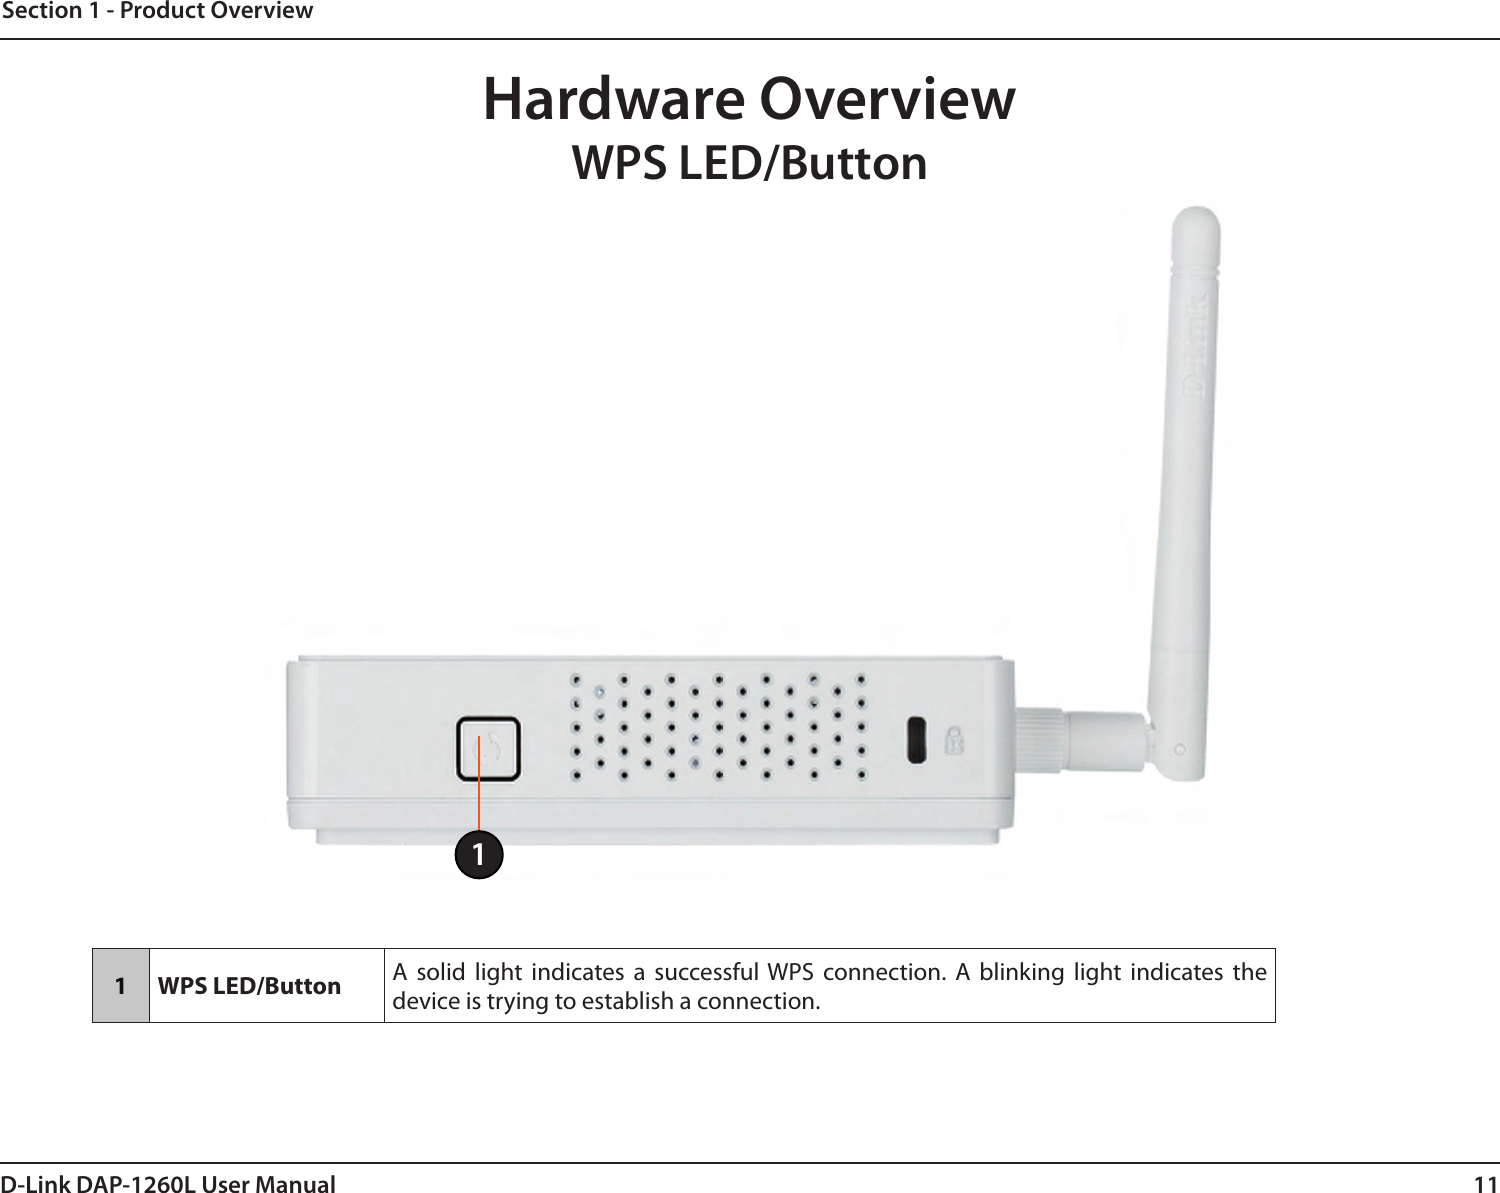 11D-Link DAP-1260L User ManualSection 1 - Product OverviewHardware OverviewWPS LED/Button11WPS LED/Button A  solid  light  indicates  a  successful WPS  connection.  A  blinking  light  indicates  the device is trying to establish a connection.